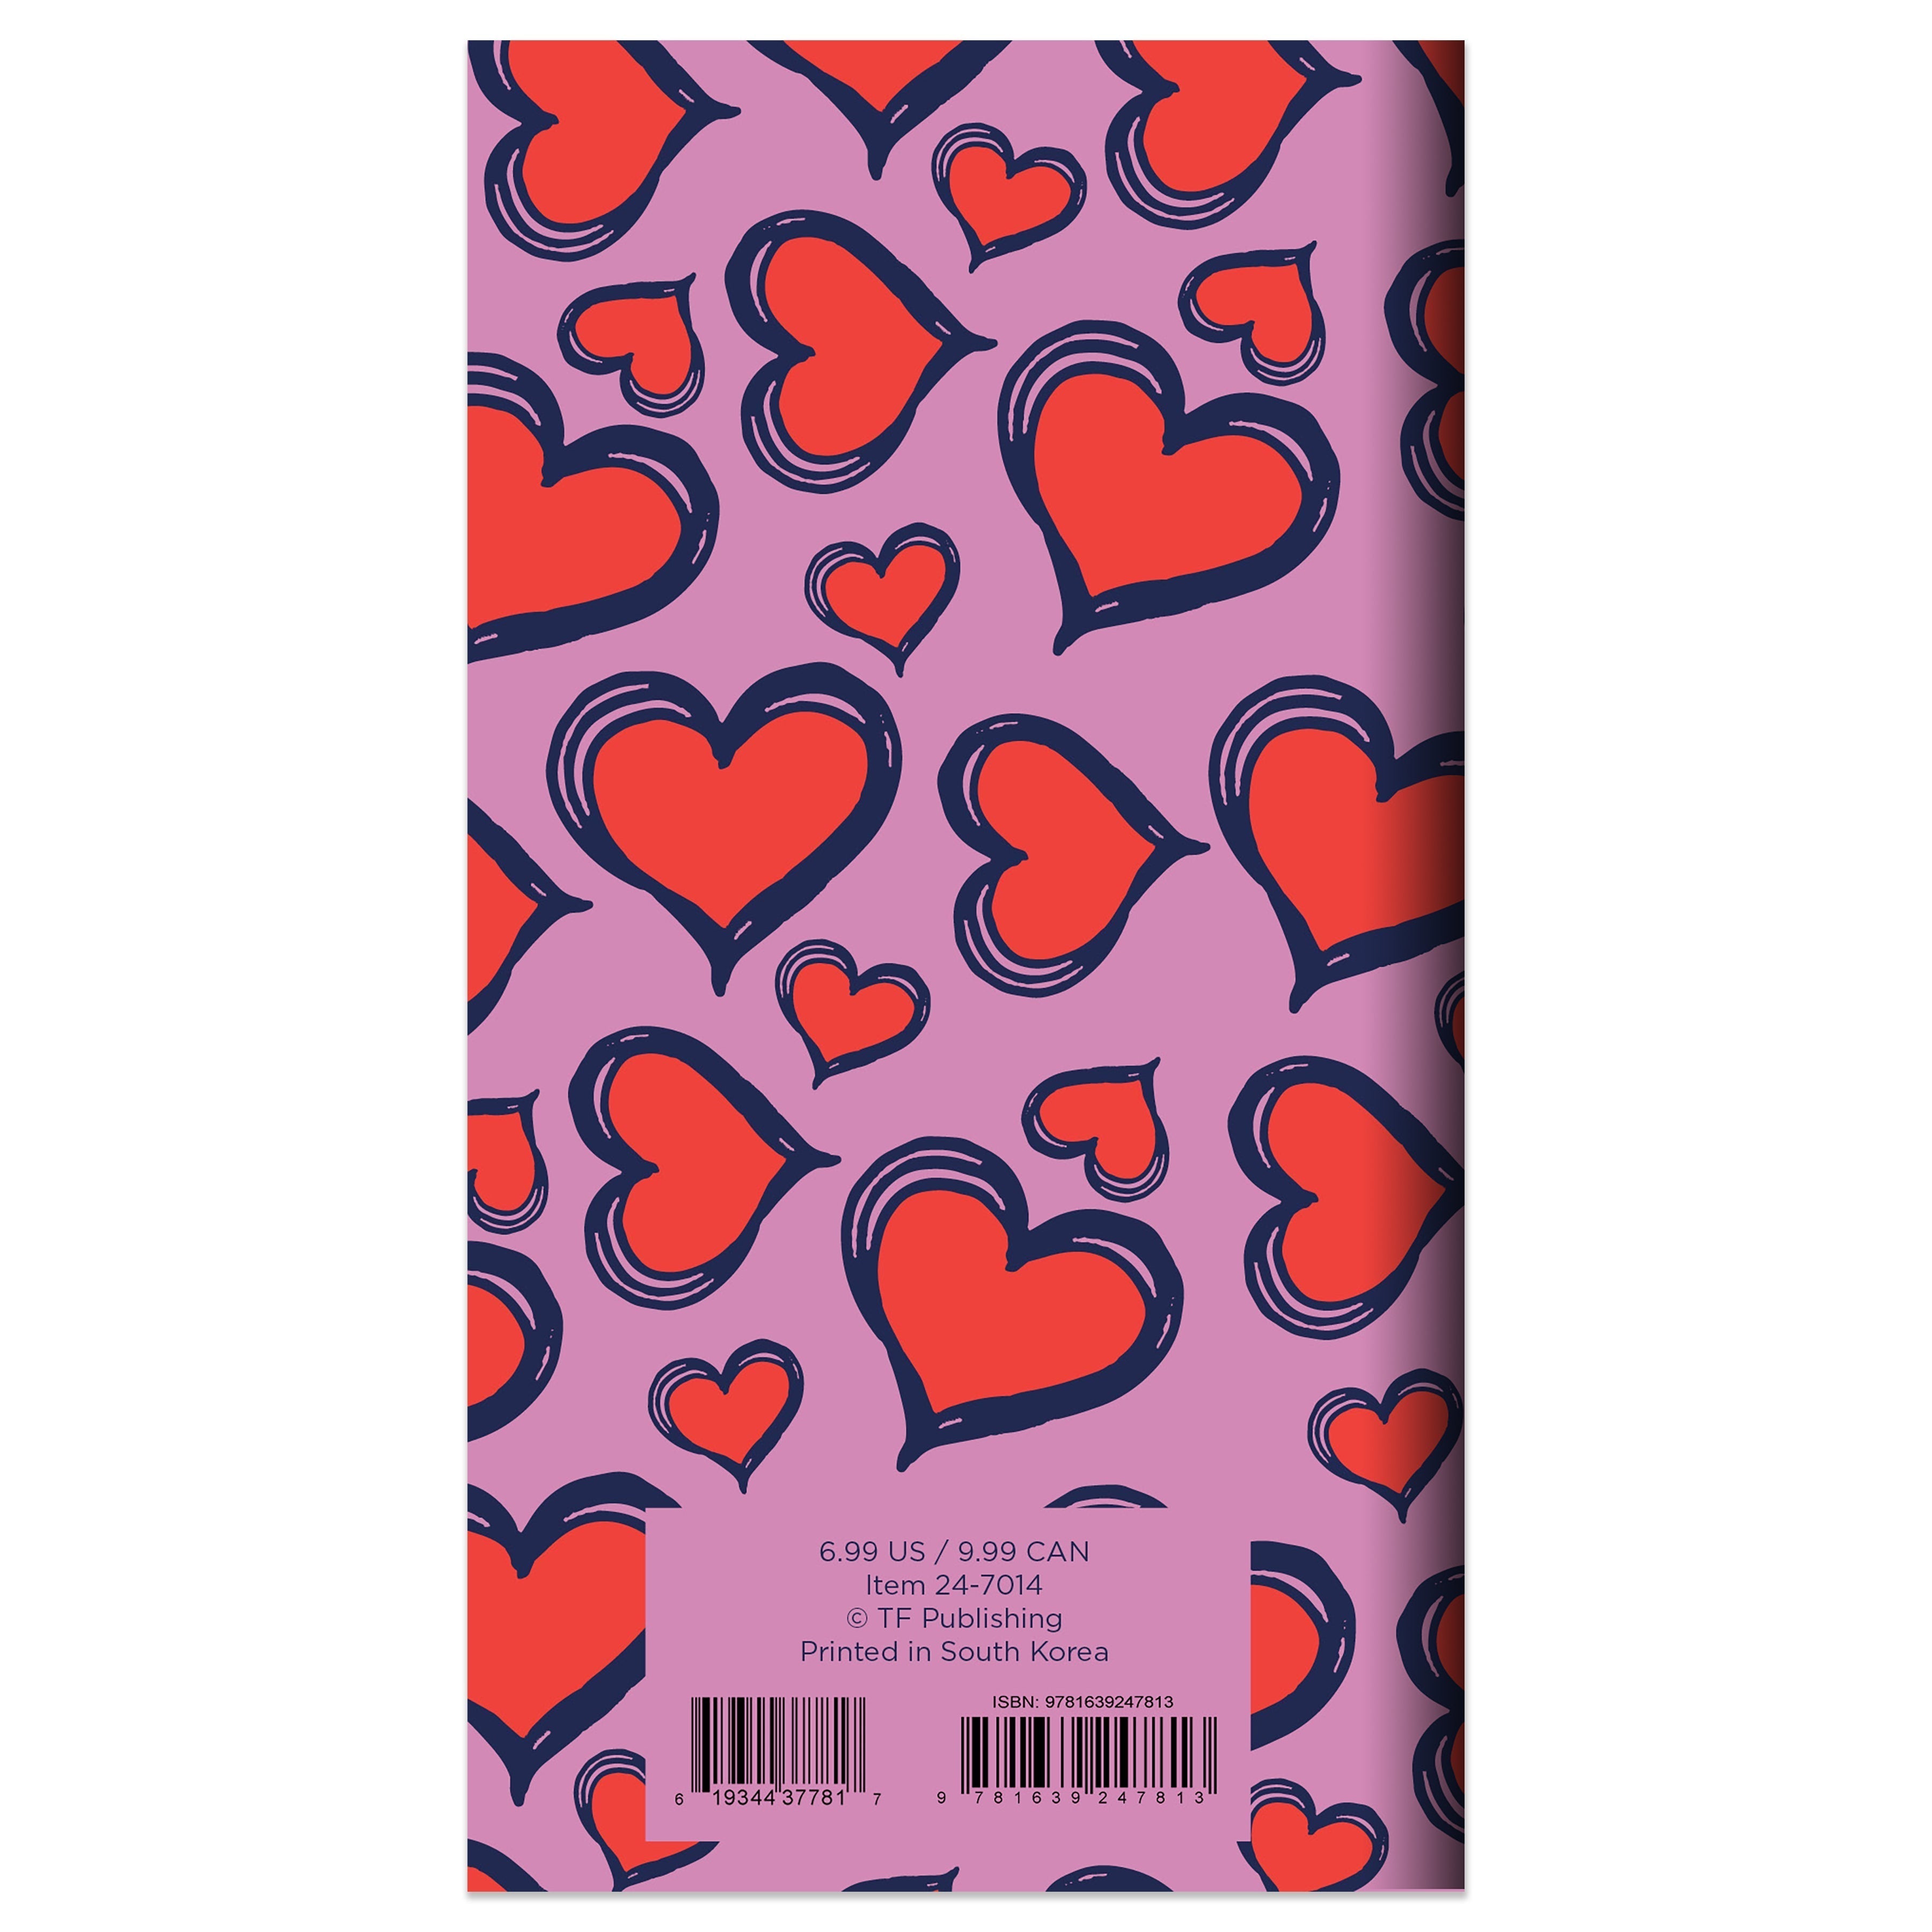 2024-2025 Lovely Hearts - Small Monthly Pocket Diary/Planner